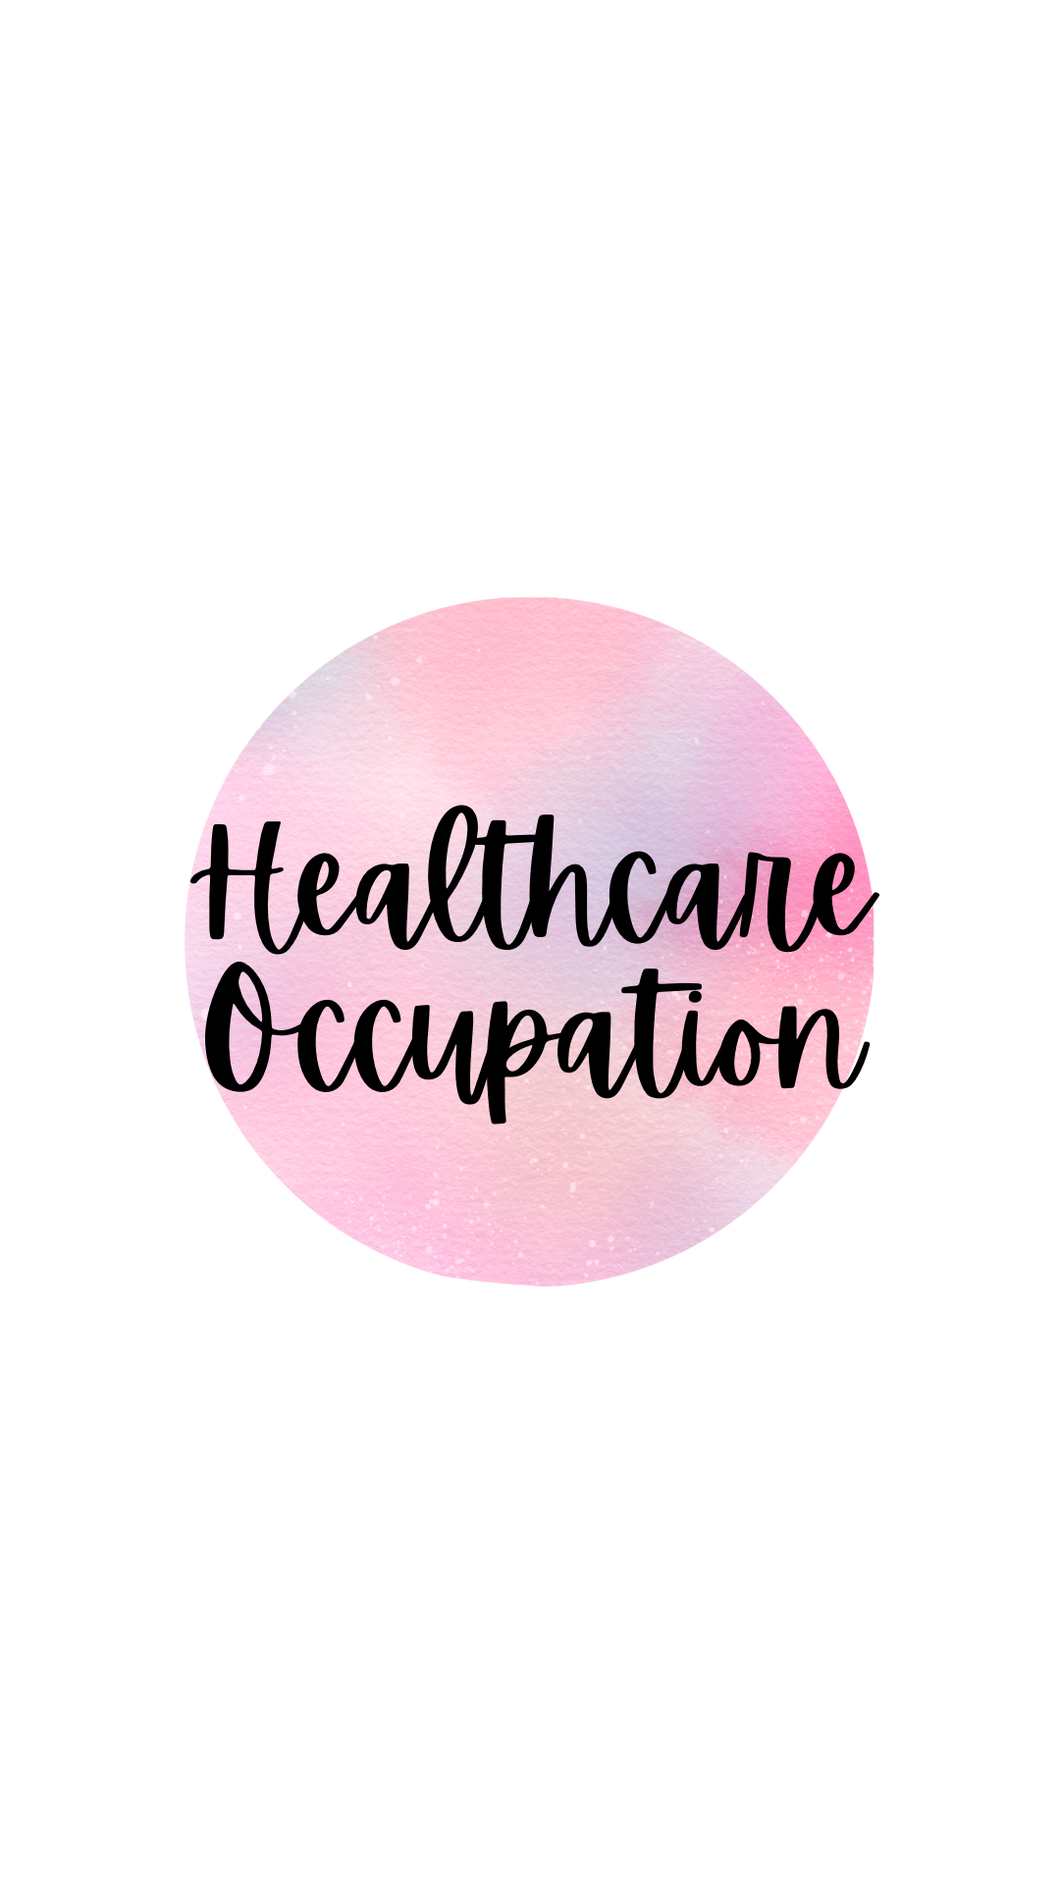 Pick a Health Care Occupation